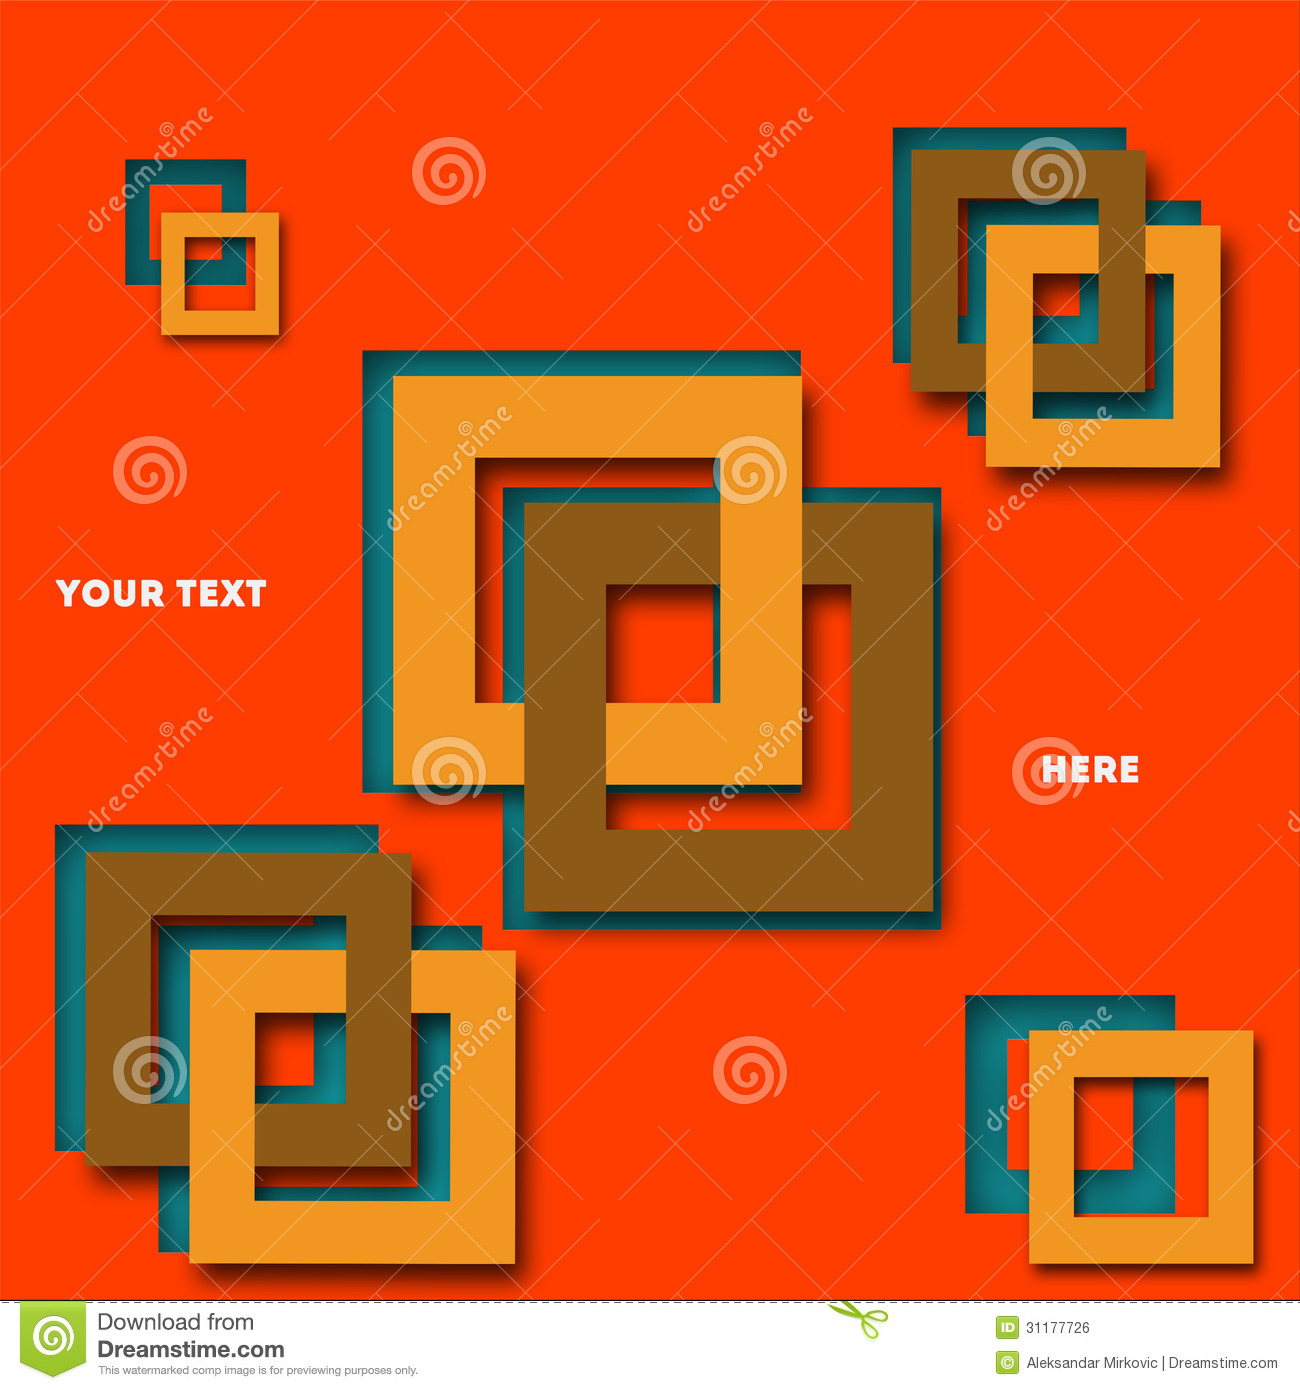 Cube Abstract Background Royalty Free Stock Image   Image  31177726